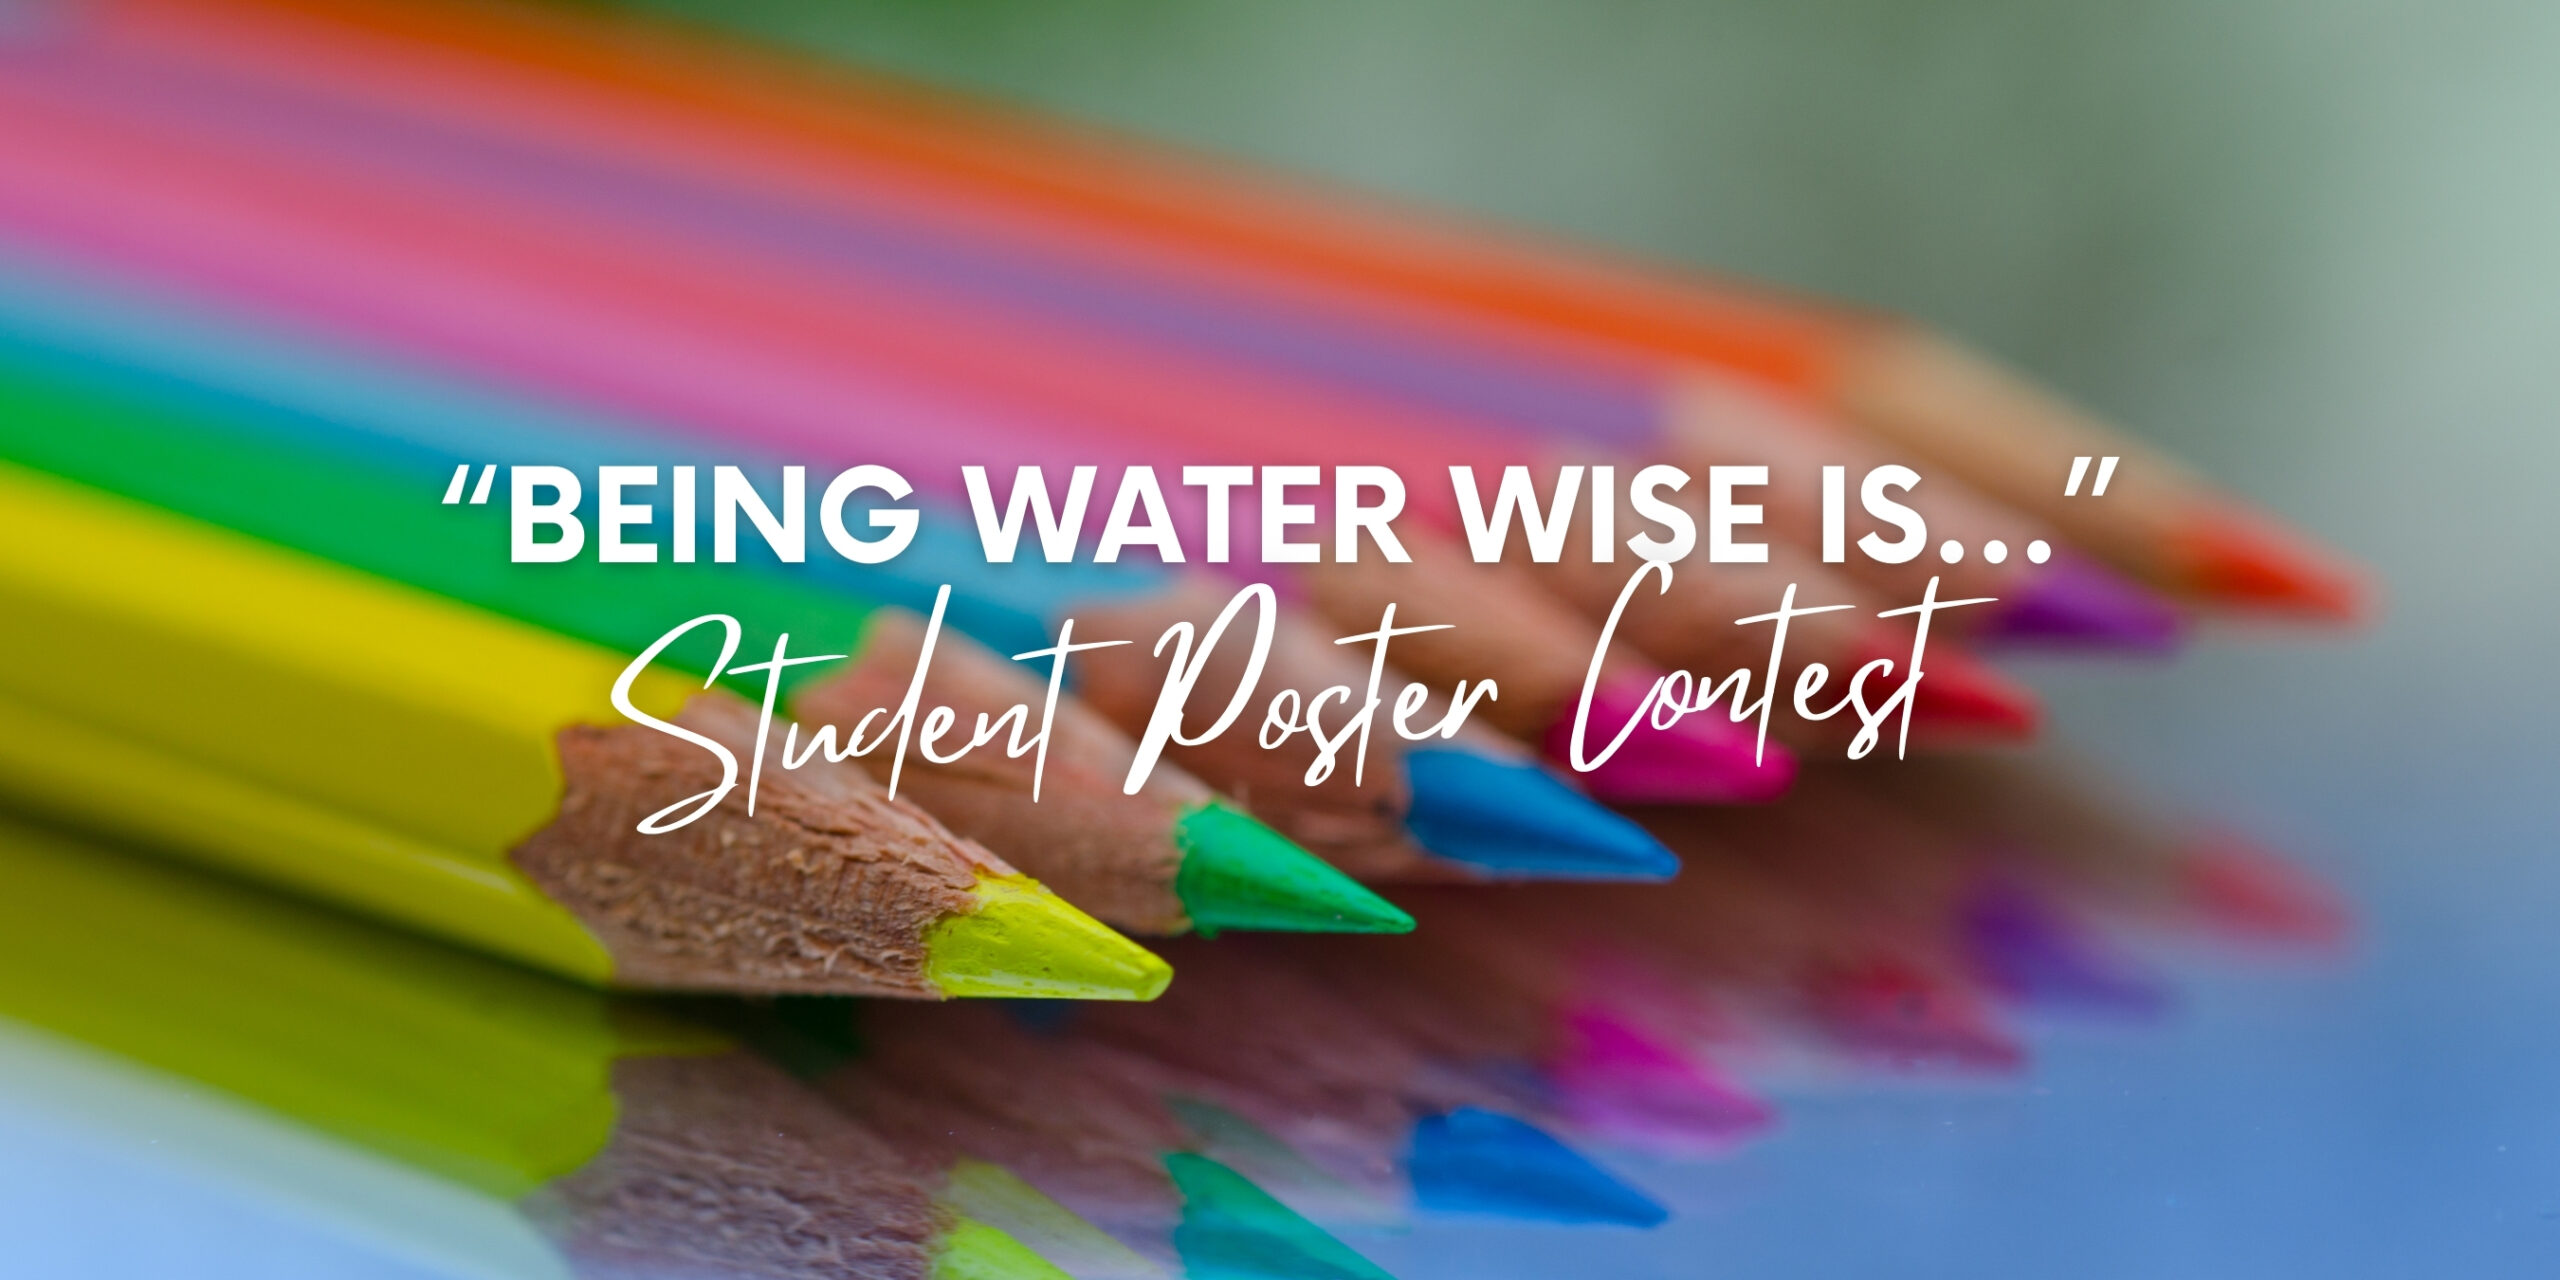 Cover image of colored pencils and Enter Otay Water District's Being Water Wise is... Student Poster Contest